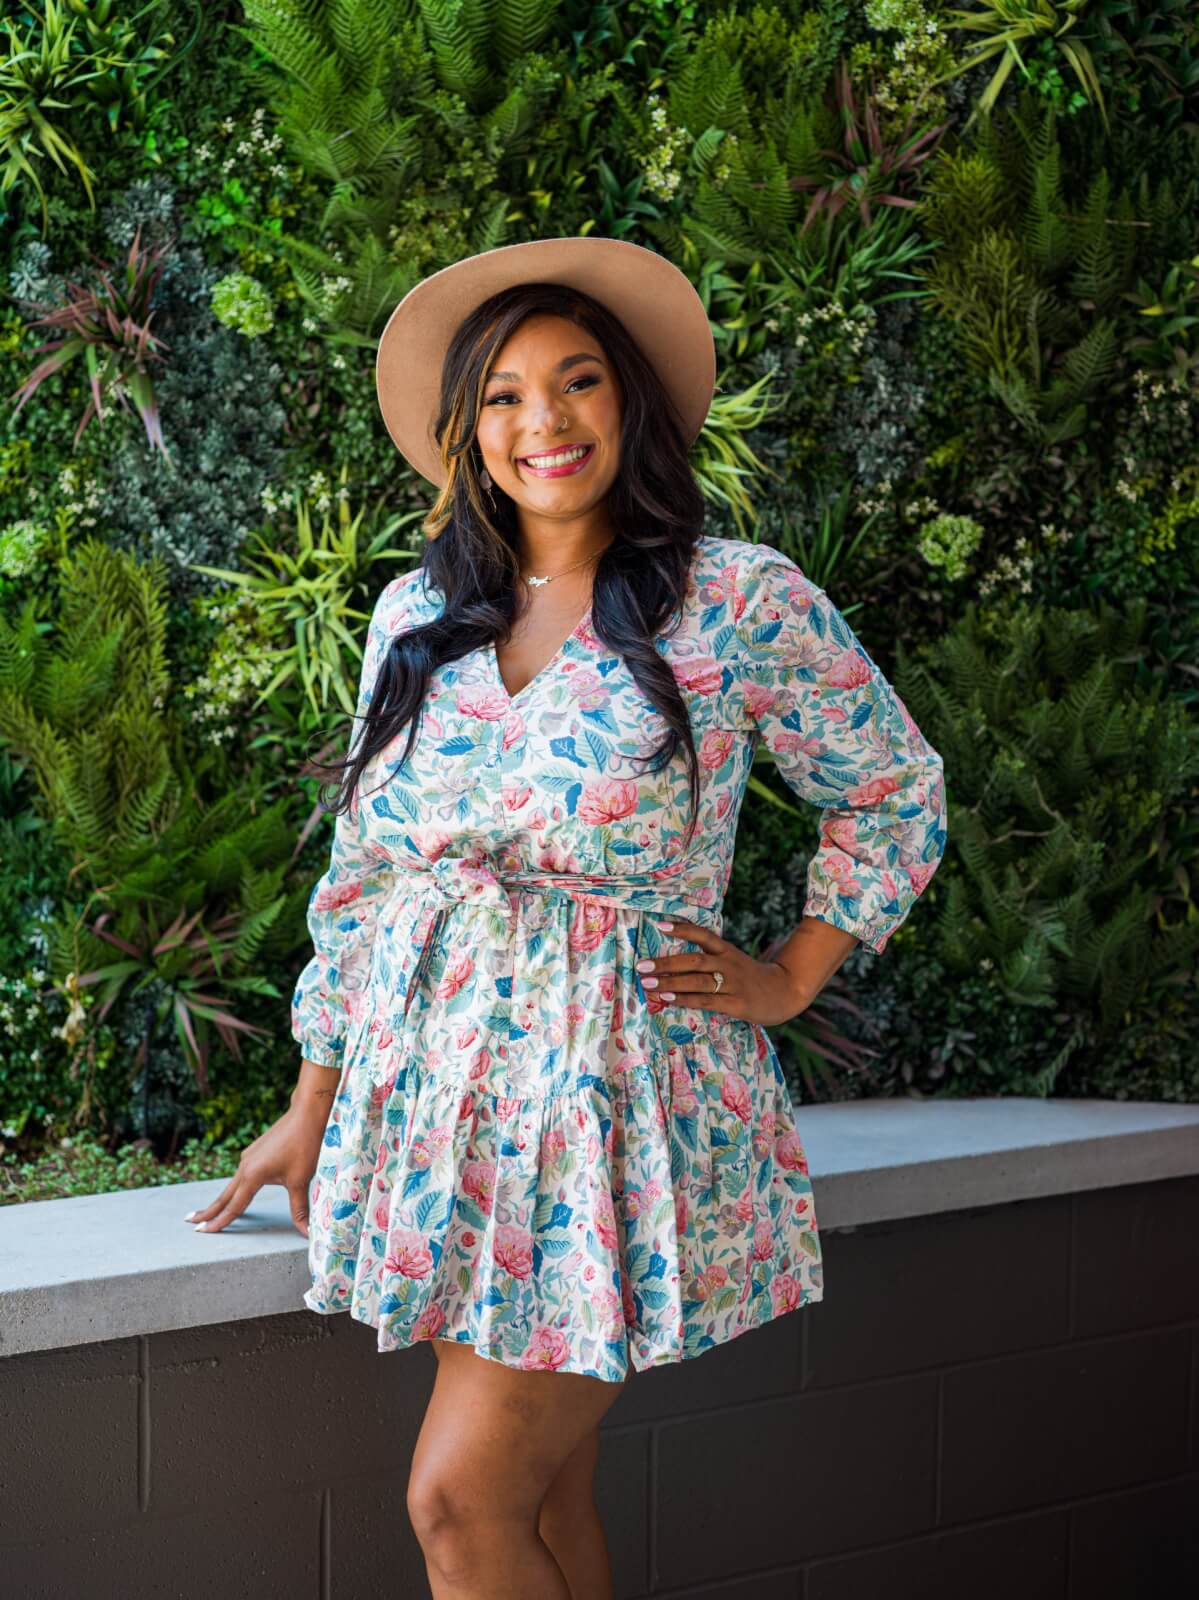 young woman with dark hair posing in floral dress and hat